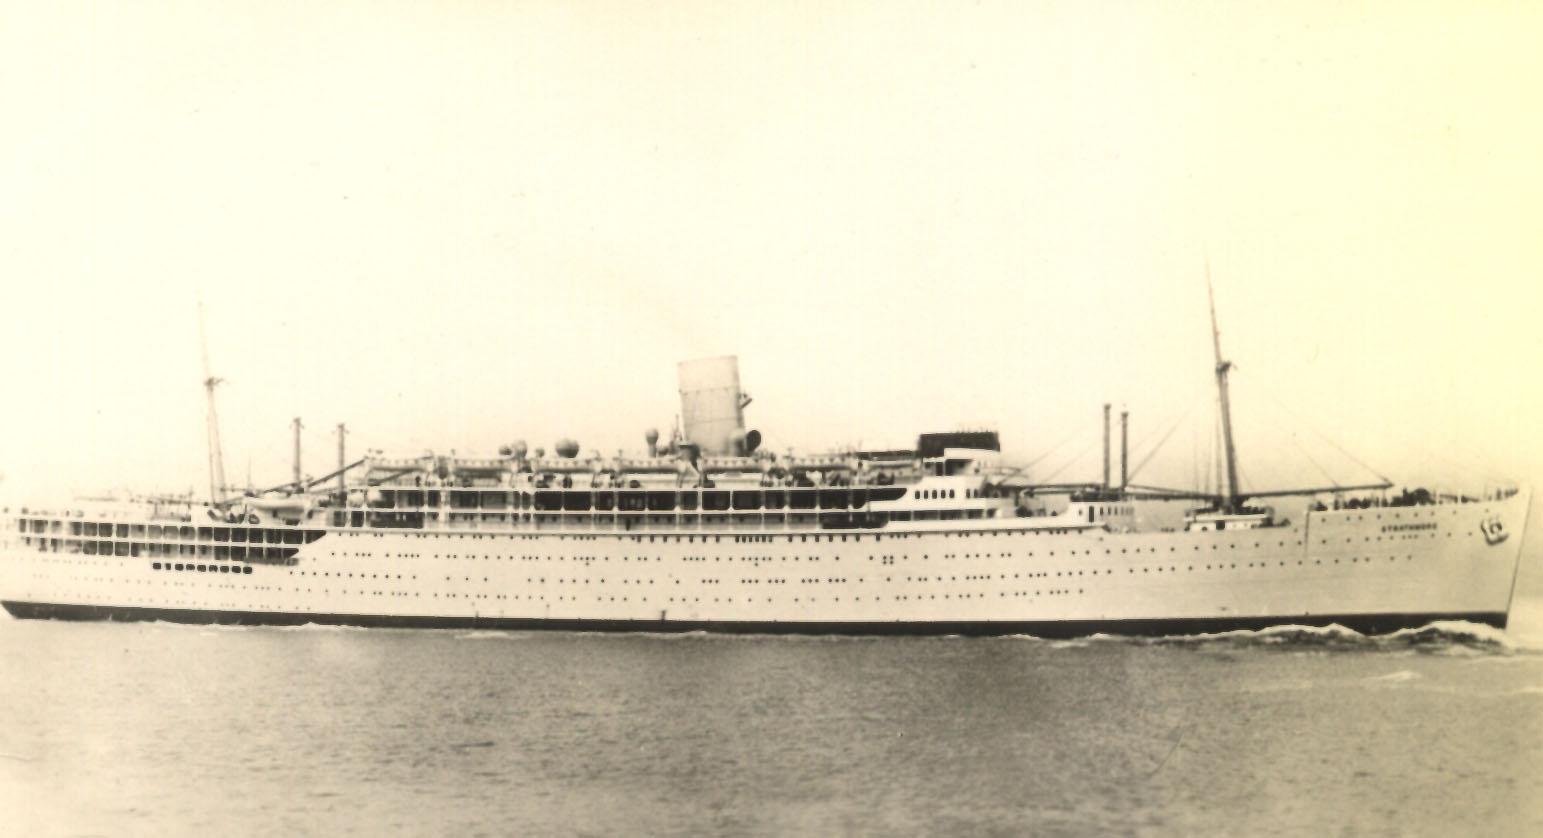 Built by Vickers-Armstrong Ltd, Barrow-In-Furness, England.  Launched on 4 April 1935 by the Duchess Of York and completed in September 1935, made her inaugural voyage on 27 September 1935 from London - Canary Islands.
Base Port - London
Gross Tonnage: 